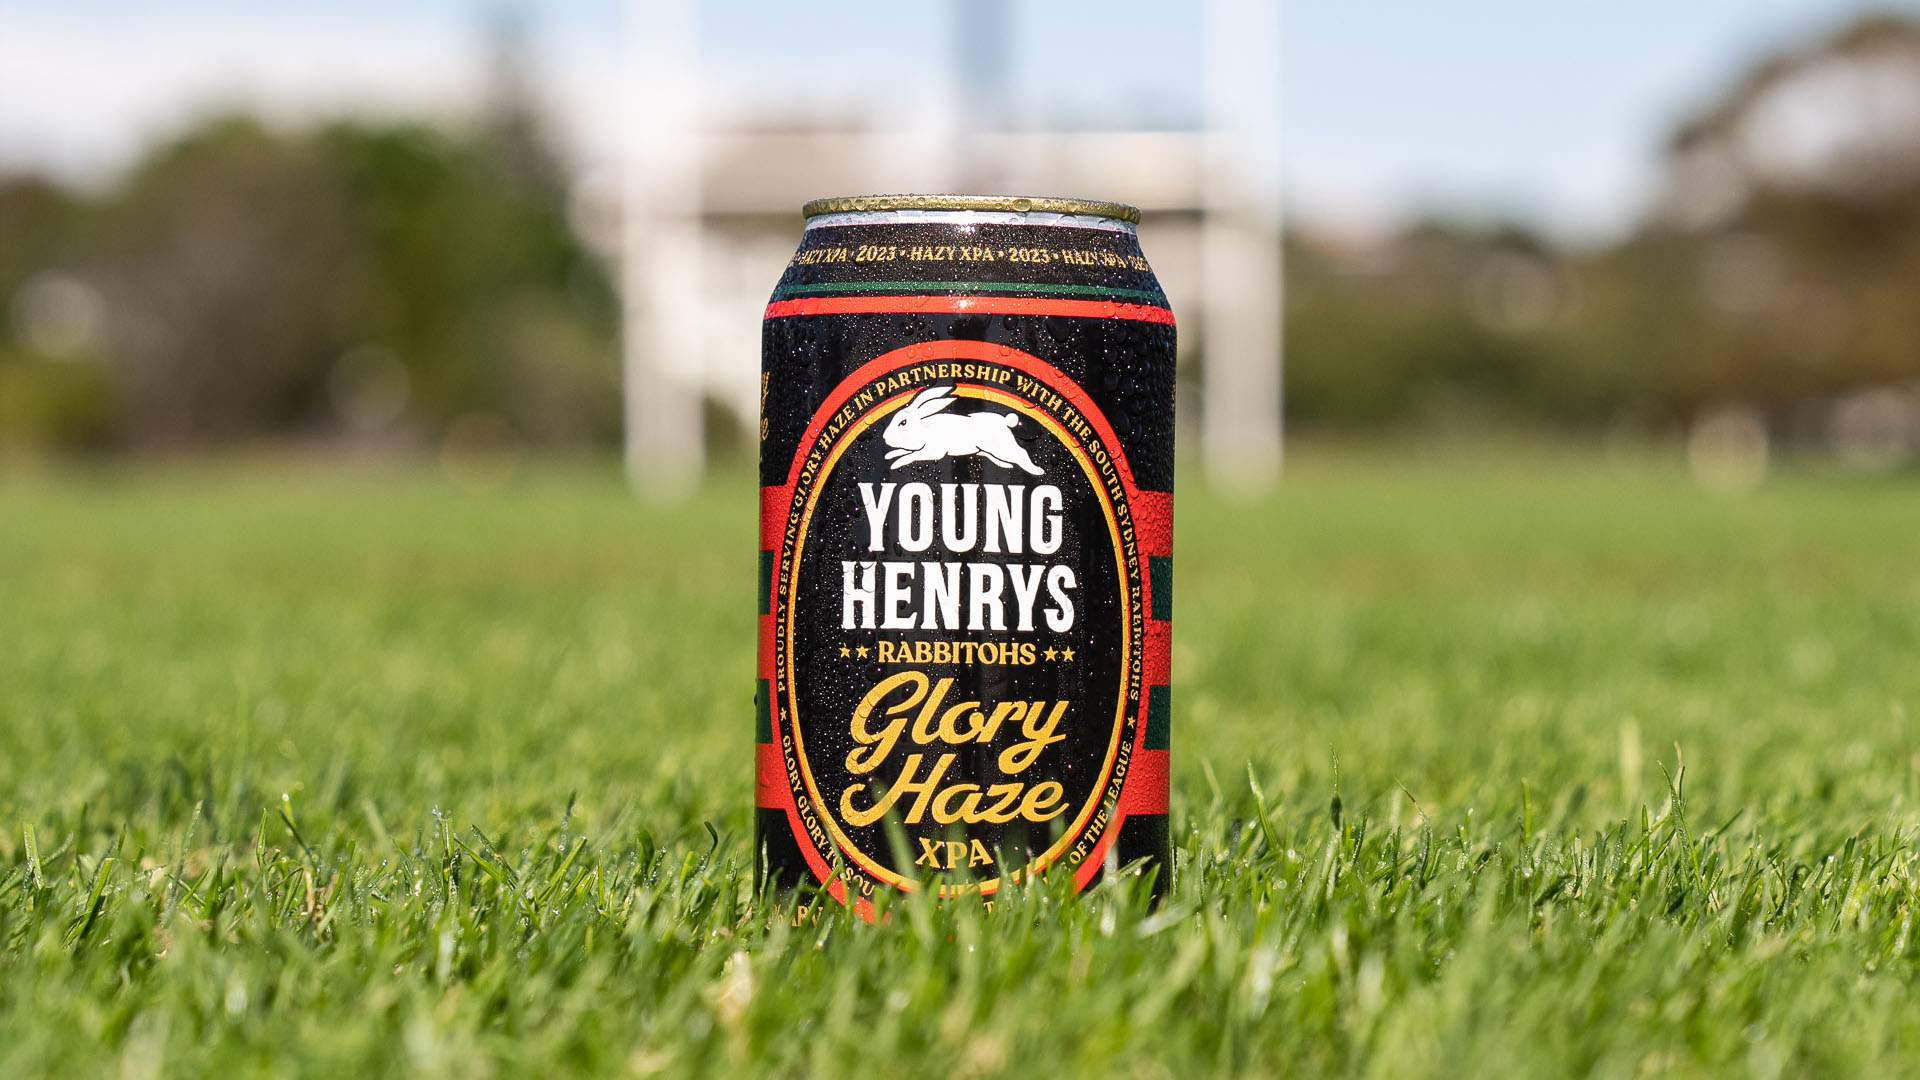 Young Henrys and the South Sydney Rabbitohs Have Teamed Up to Release the Glory Haze XPA